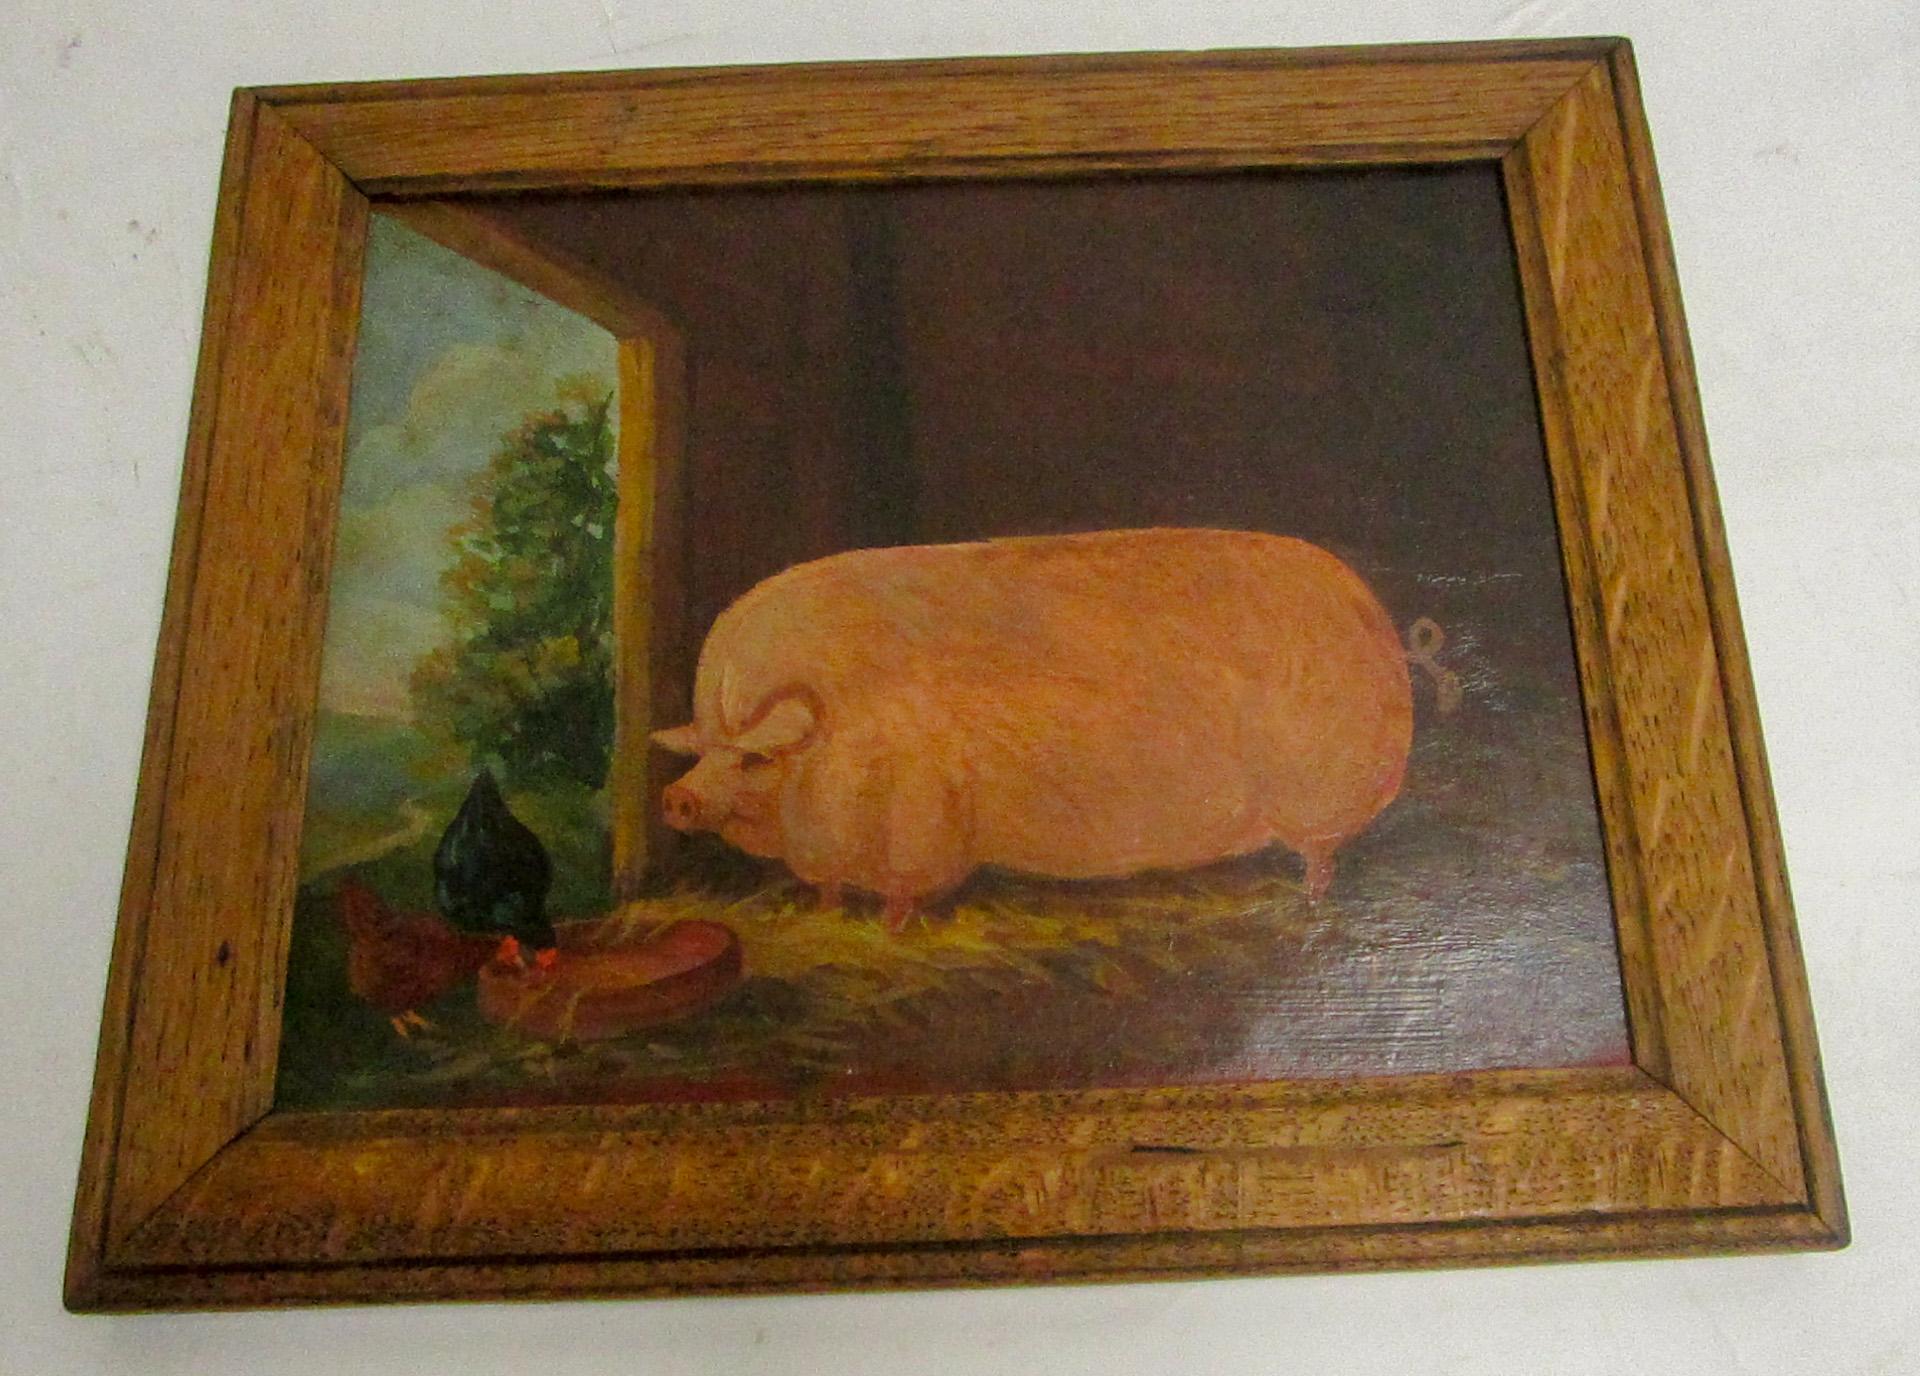 This charming barnyard scene Primitive small size, 950 inches x 7.50 inches, oil on board features a hefty pink pig with two chickens. Signed D'Fields in lower right corner. In original oak frame. A black pig companion painting by the same artist is